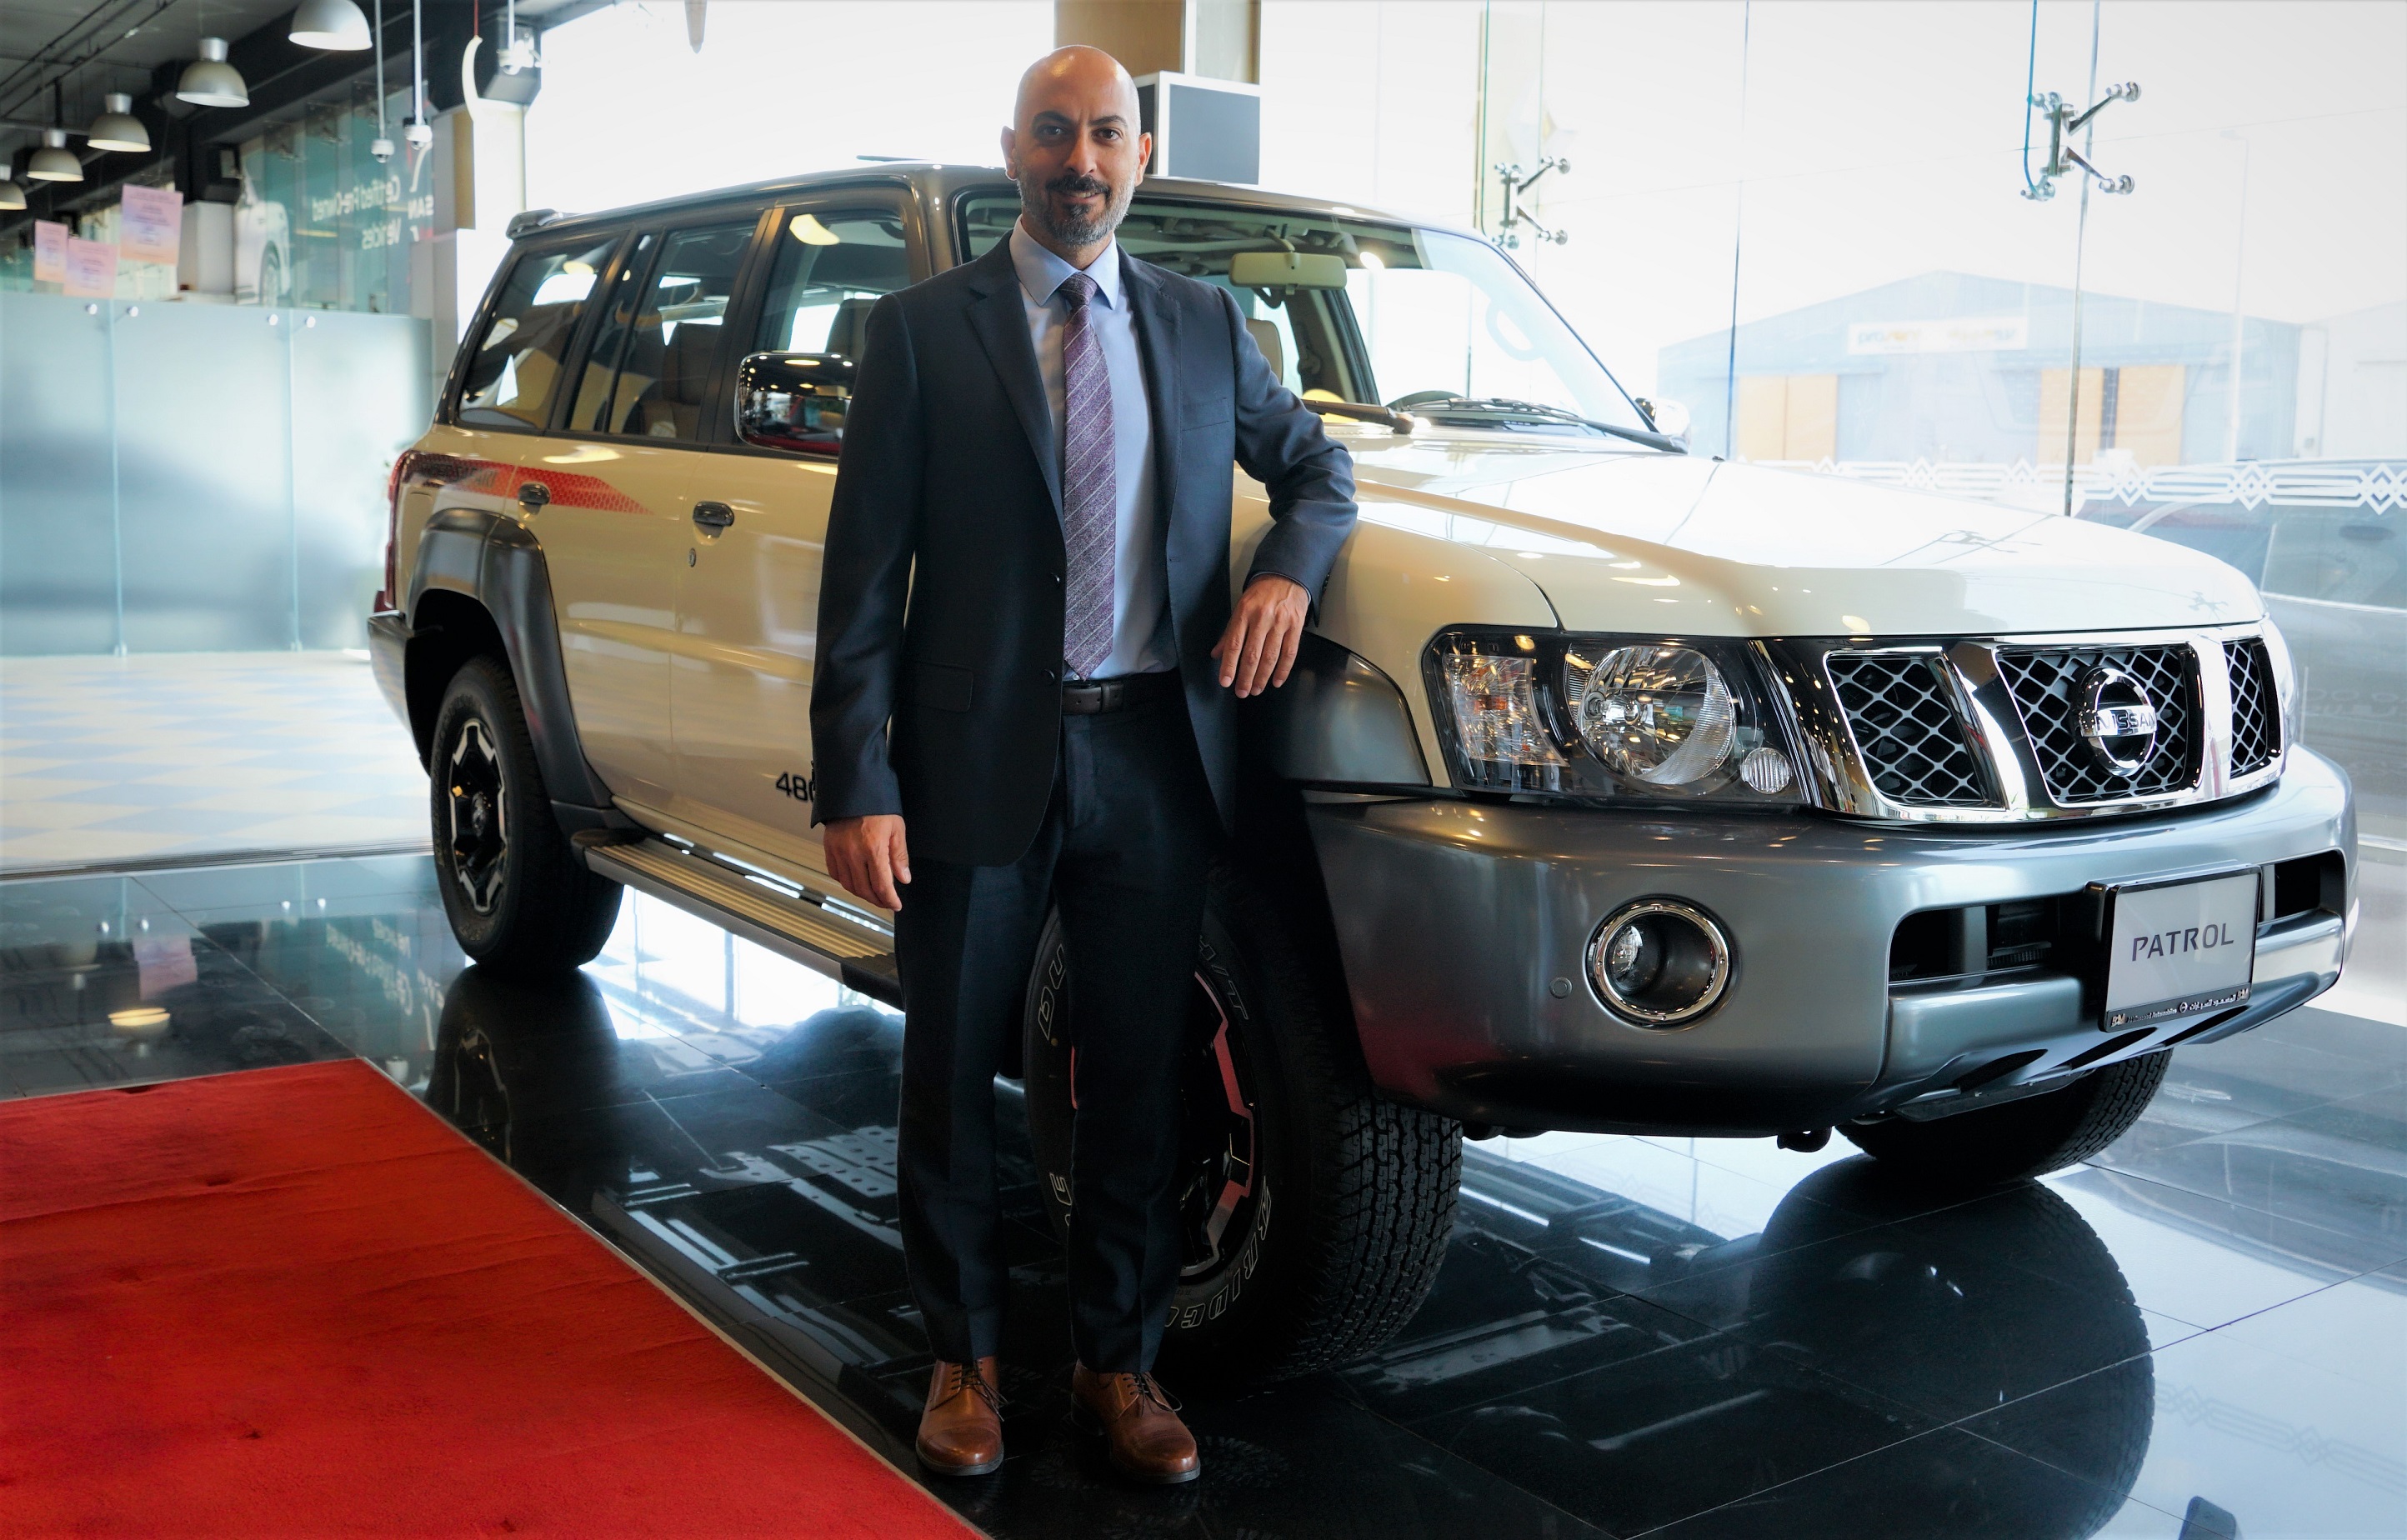 Statement by Bachir Gemayel, Sales and Marketing Director of Al Masaood Automobiles, on Nissan’s Positive Sales Performance During Fiscal Year 2021